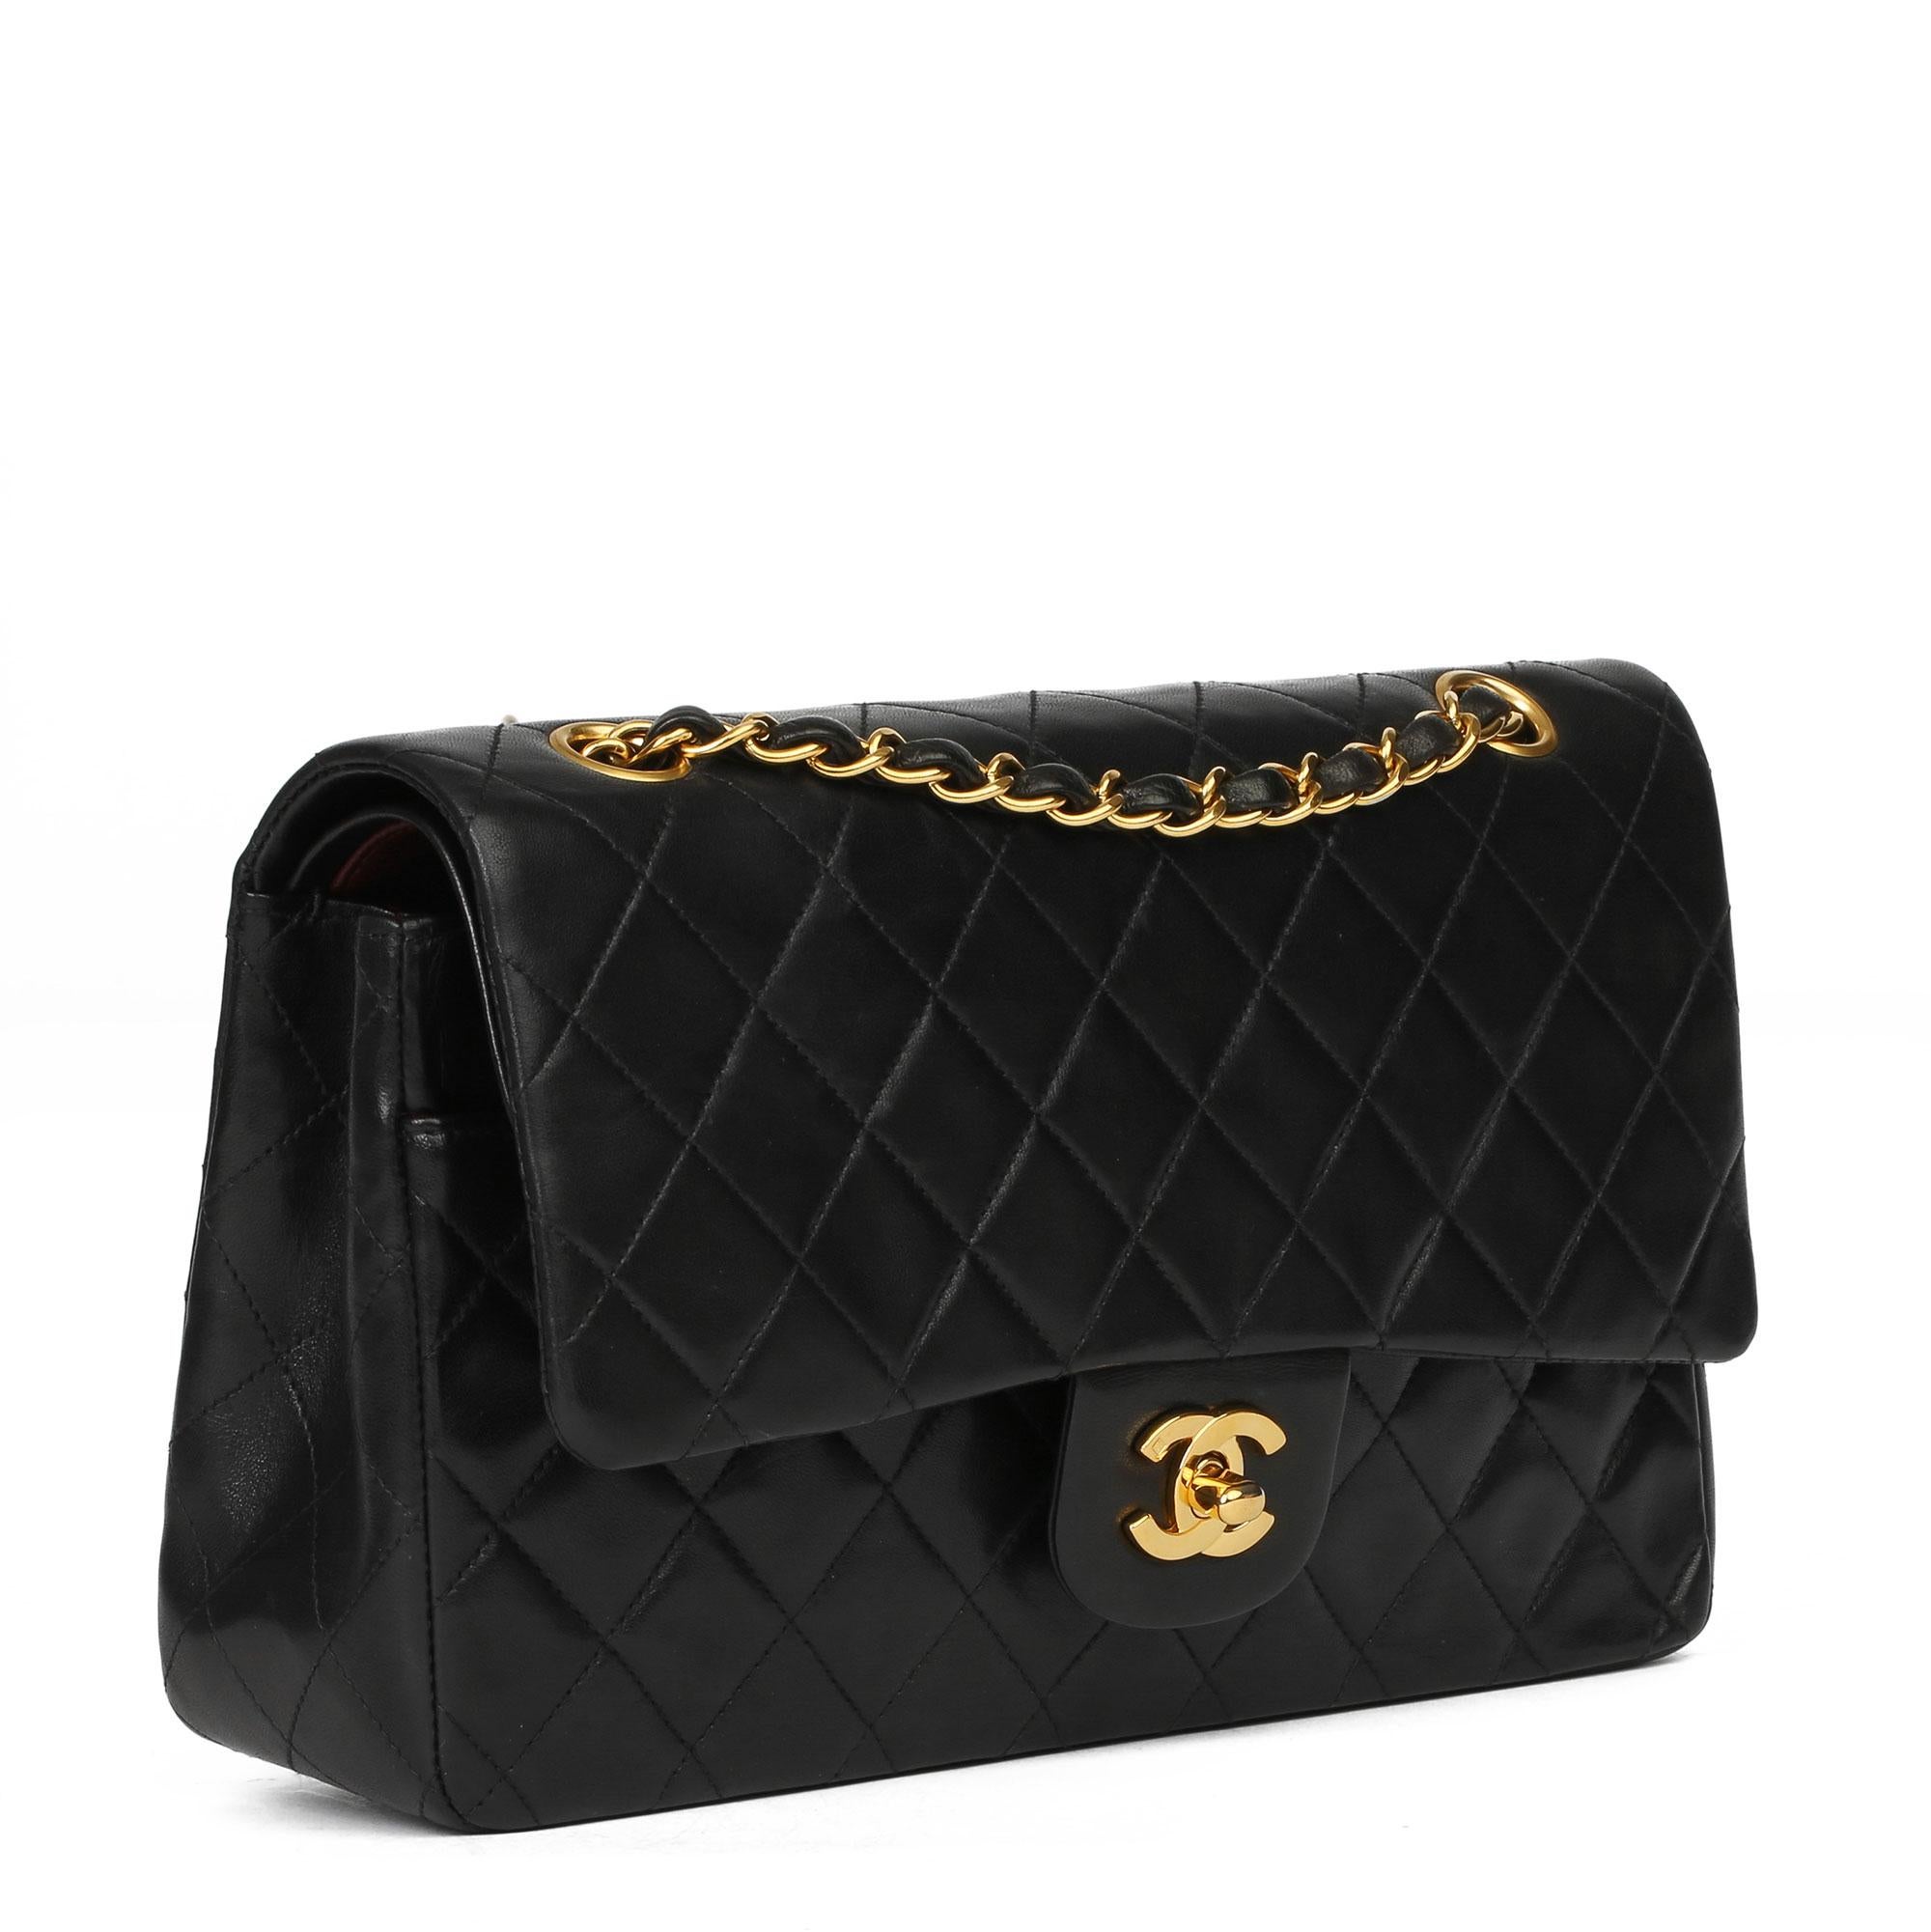 CHANEL
Black Quilted Lambskin Vintage Medium Classic Double Flap Bag

Xupes Reference: HB3937
Serial Number: 4567300
Age (Circa): 1997
Accompanied By: Chanel Dust Bag
Authenticity Details: Serial Sticker (Made in France)
Gender: Ladies
Type: